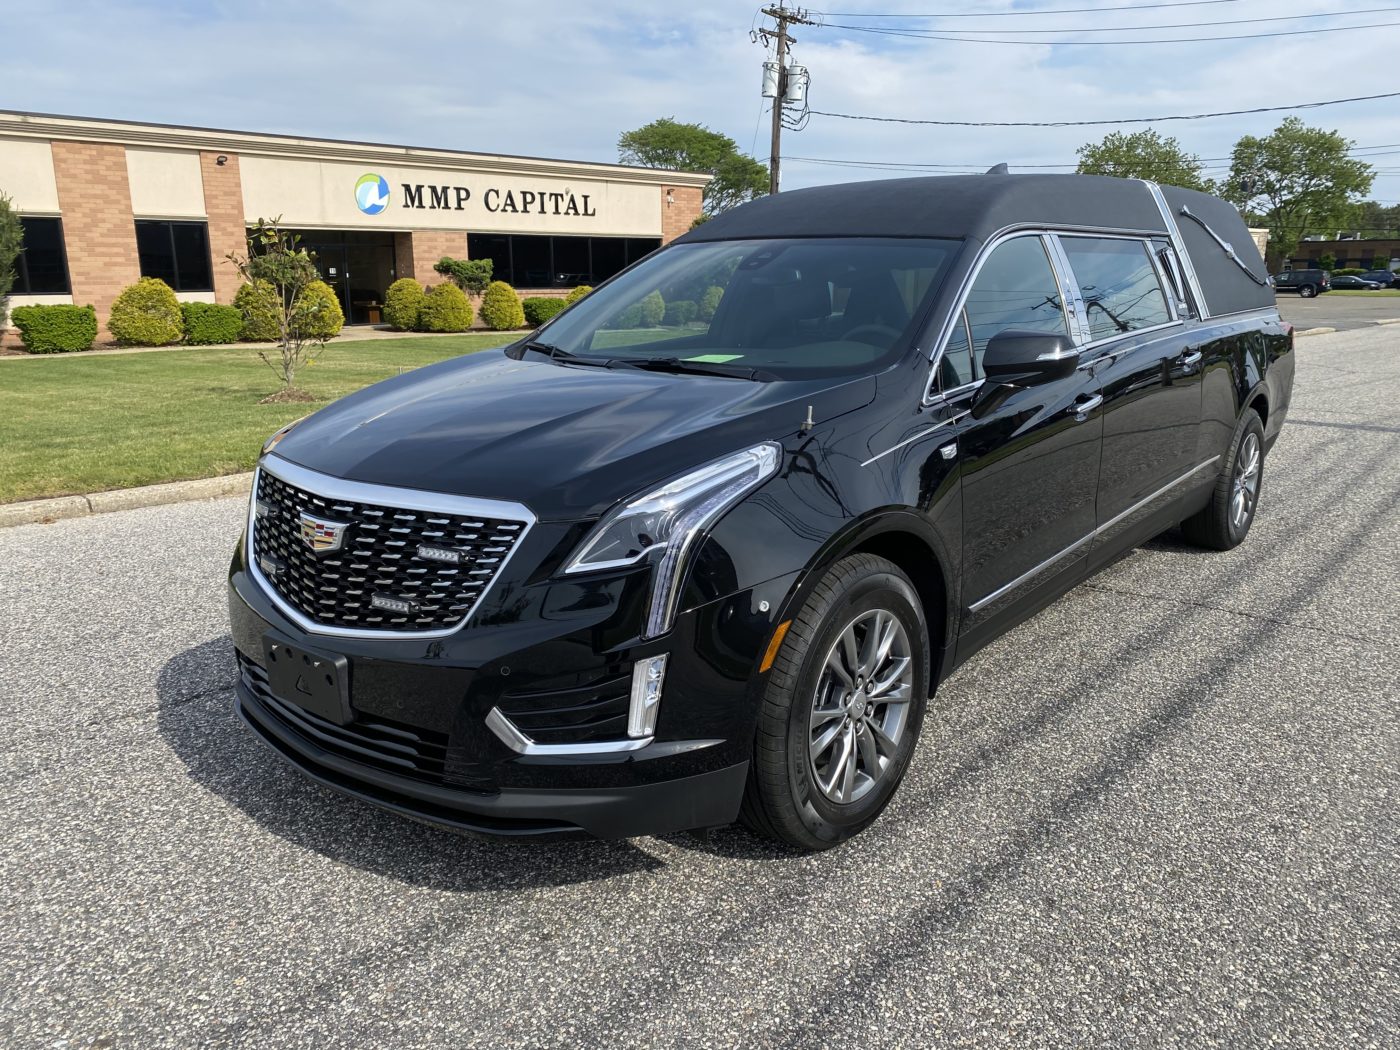 2024 CADILLAC XT5 HERITAGE FUNERAL HEARSE Specialty Hearse